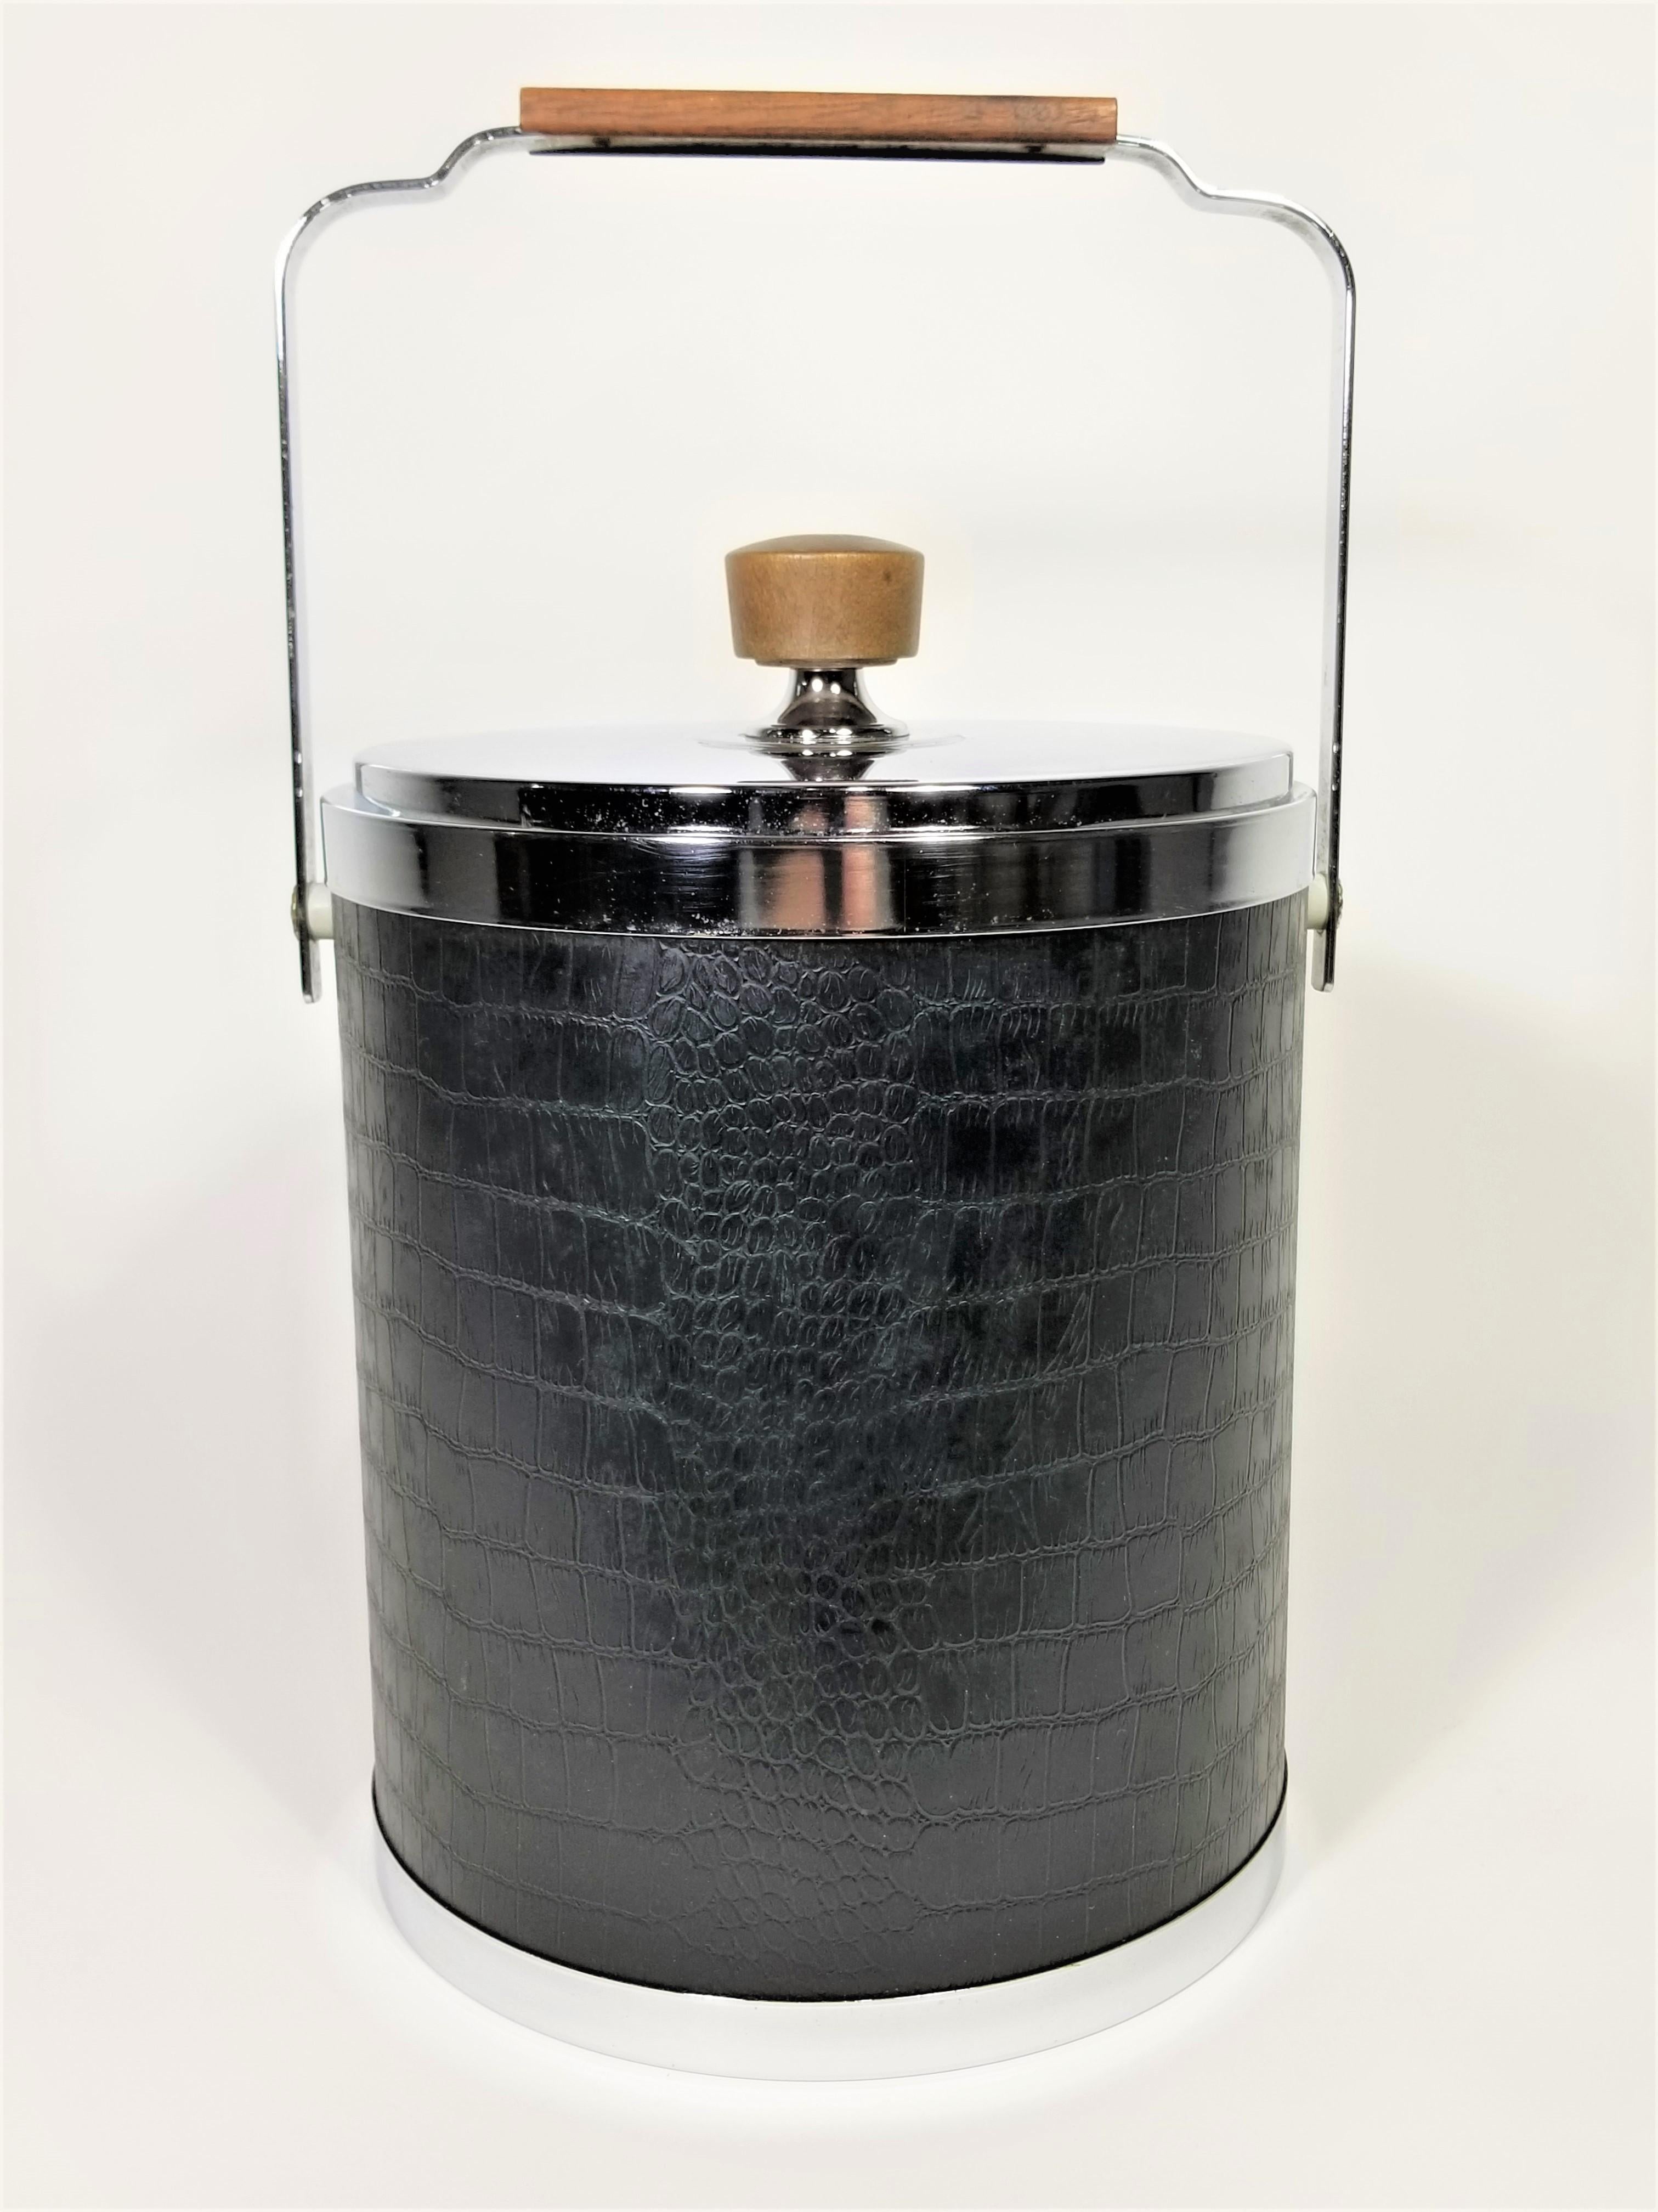 Midcentury 1960s ice bucket. Chrome with black alligator embossed design vinyl. Ice bucket with walnut handles.
Measurements:
Height handle down: 11.5 inches
Height handle up: 15.0 inches
Diameter of bucket (outside): 8.25 inches
Width